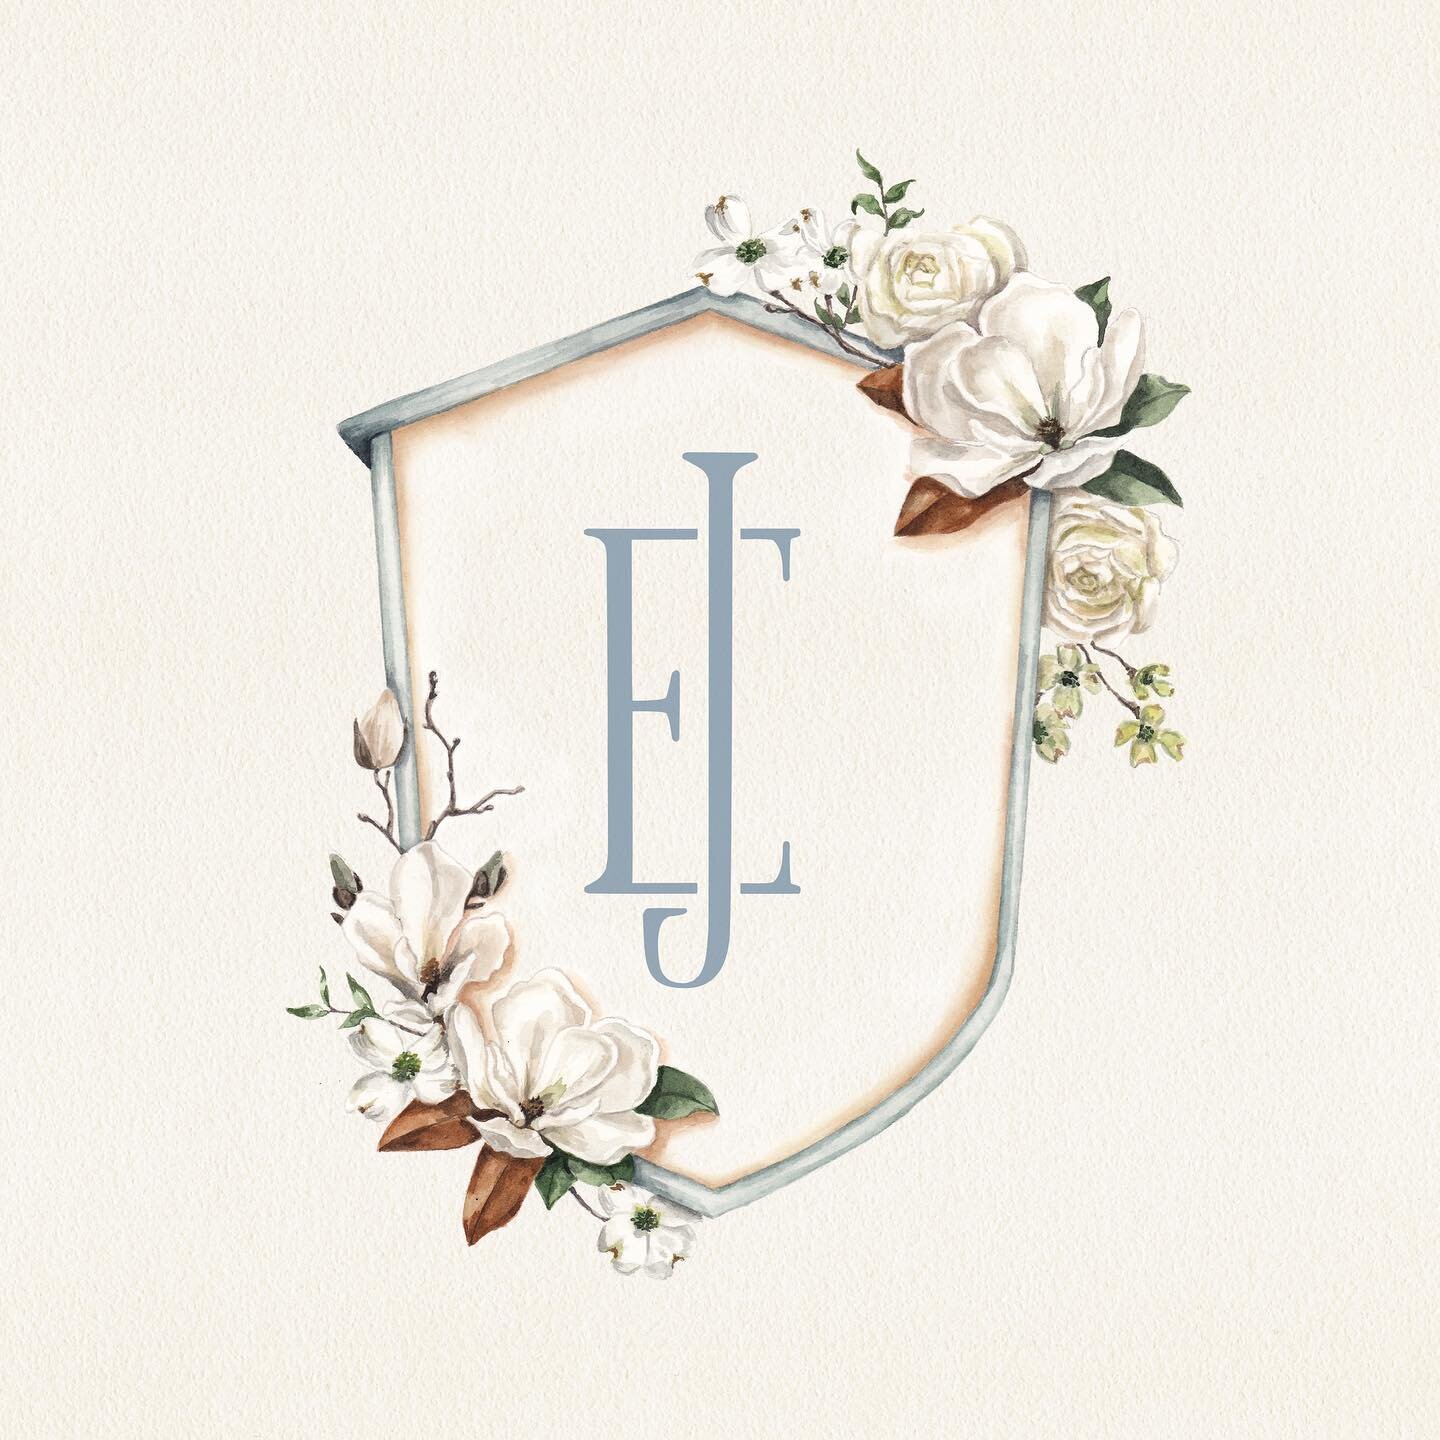 A simple crest can go a long way🤍 loved this one for E&amp;J to wed this July✨ magnolias, dogwoods, cool blues and warm earth tones ☁️
#weddingcrest #watercolorcrest #luxurystationery #watercolorweddingstationery #paperbetty #watercolorweddinginvita